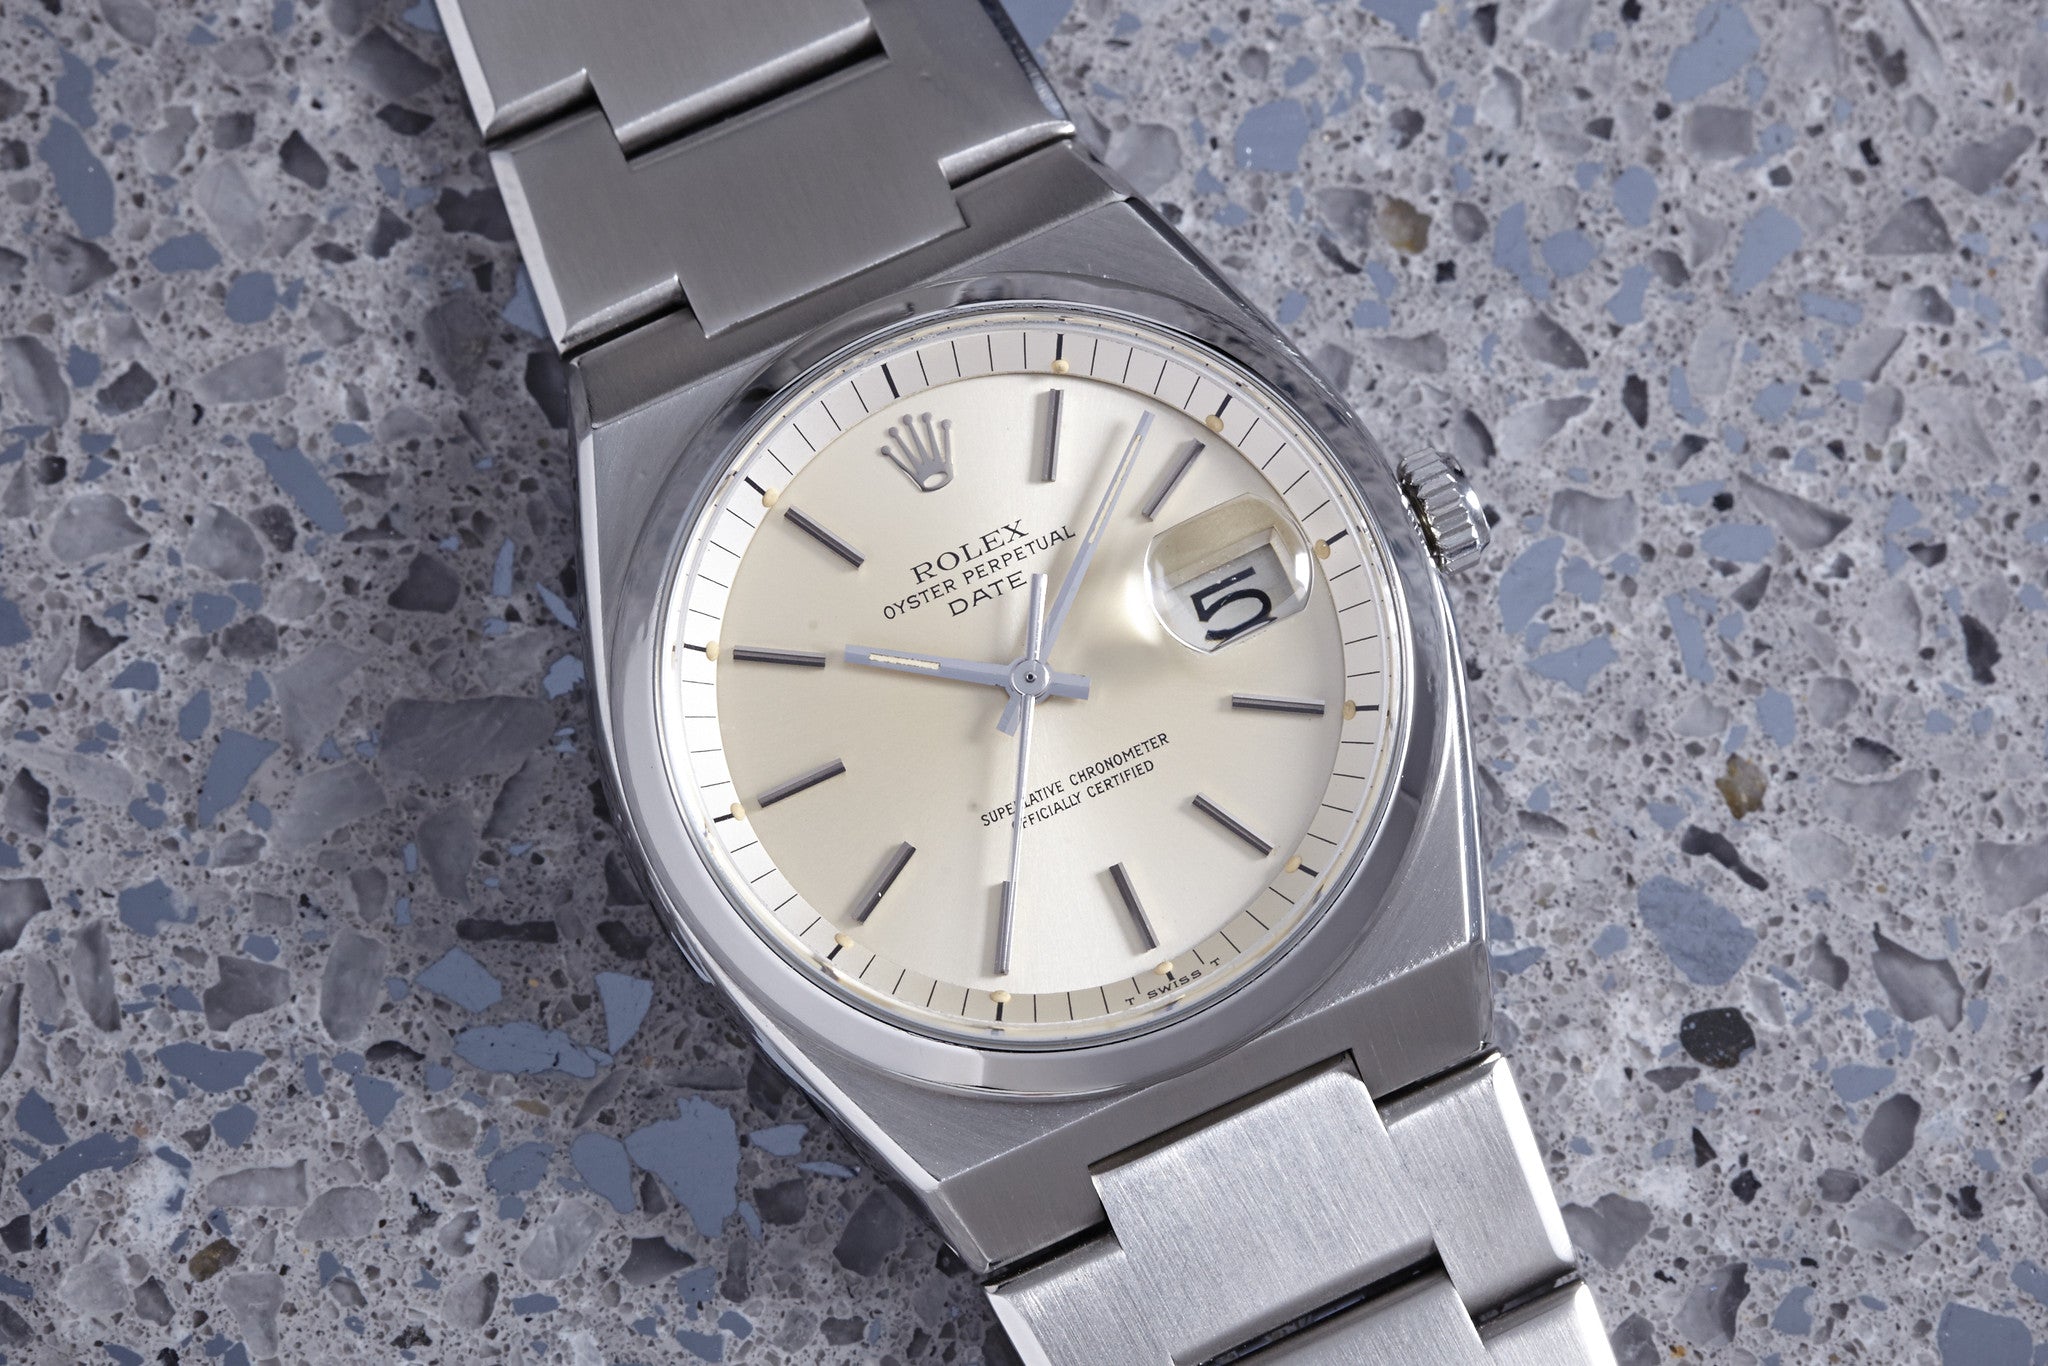 Rolex Reference 1530 Oyster Perpetual Date – Analog:Shift